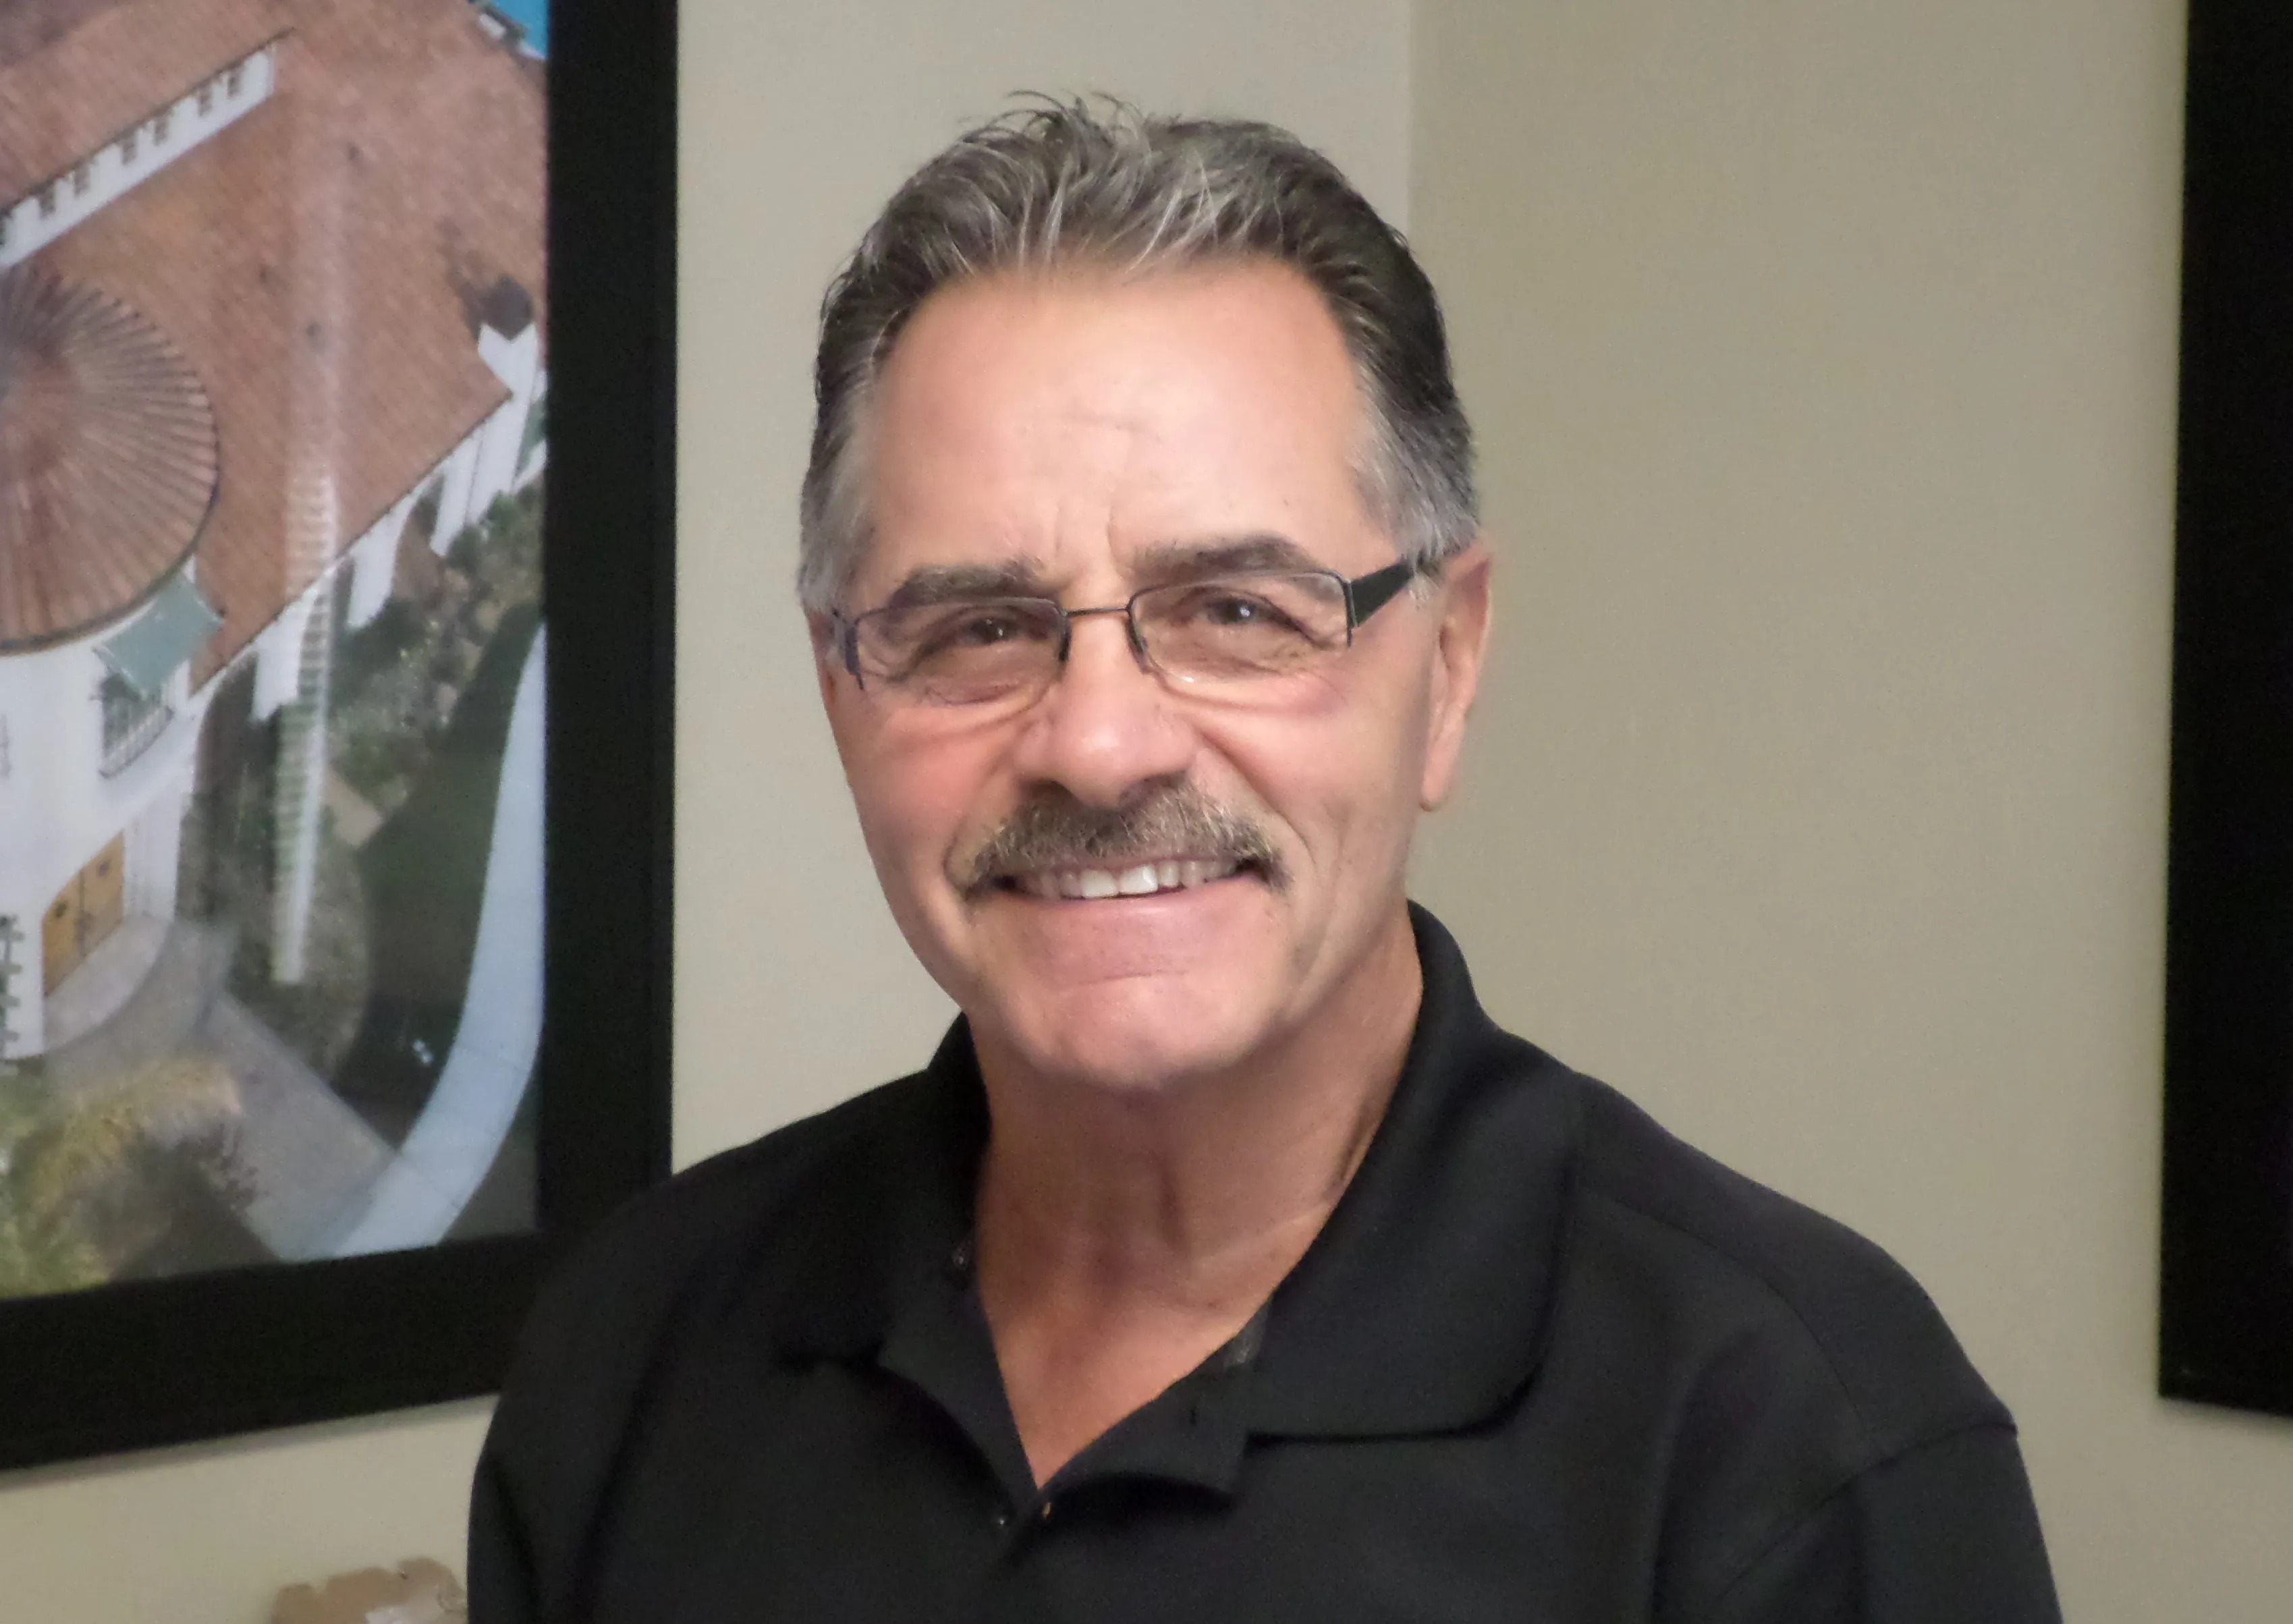 Mike Creeden is owner of Marco Roofing, a Diamond Certified company. He can be reached at (925) 405-5996 or by email.